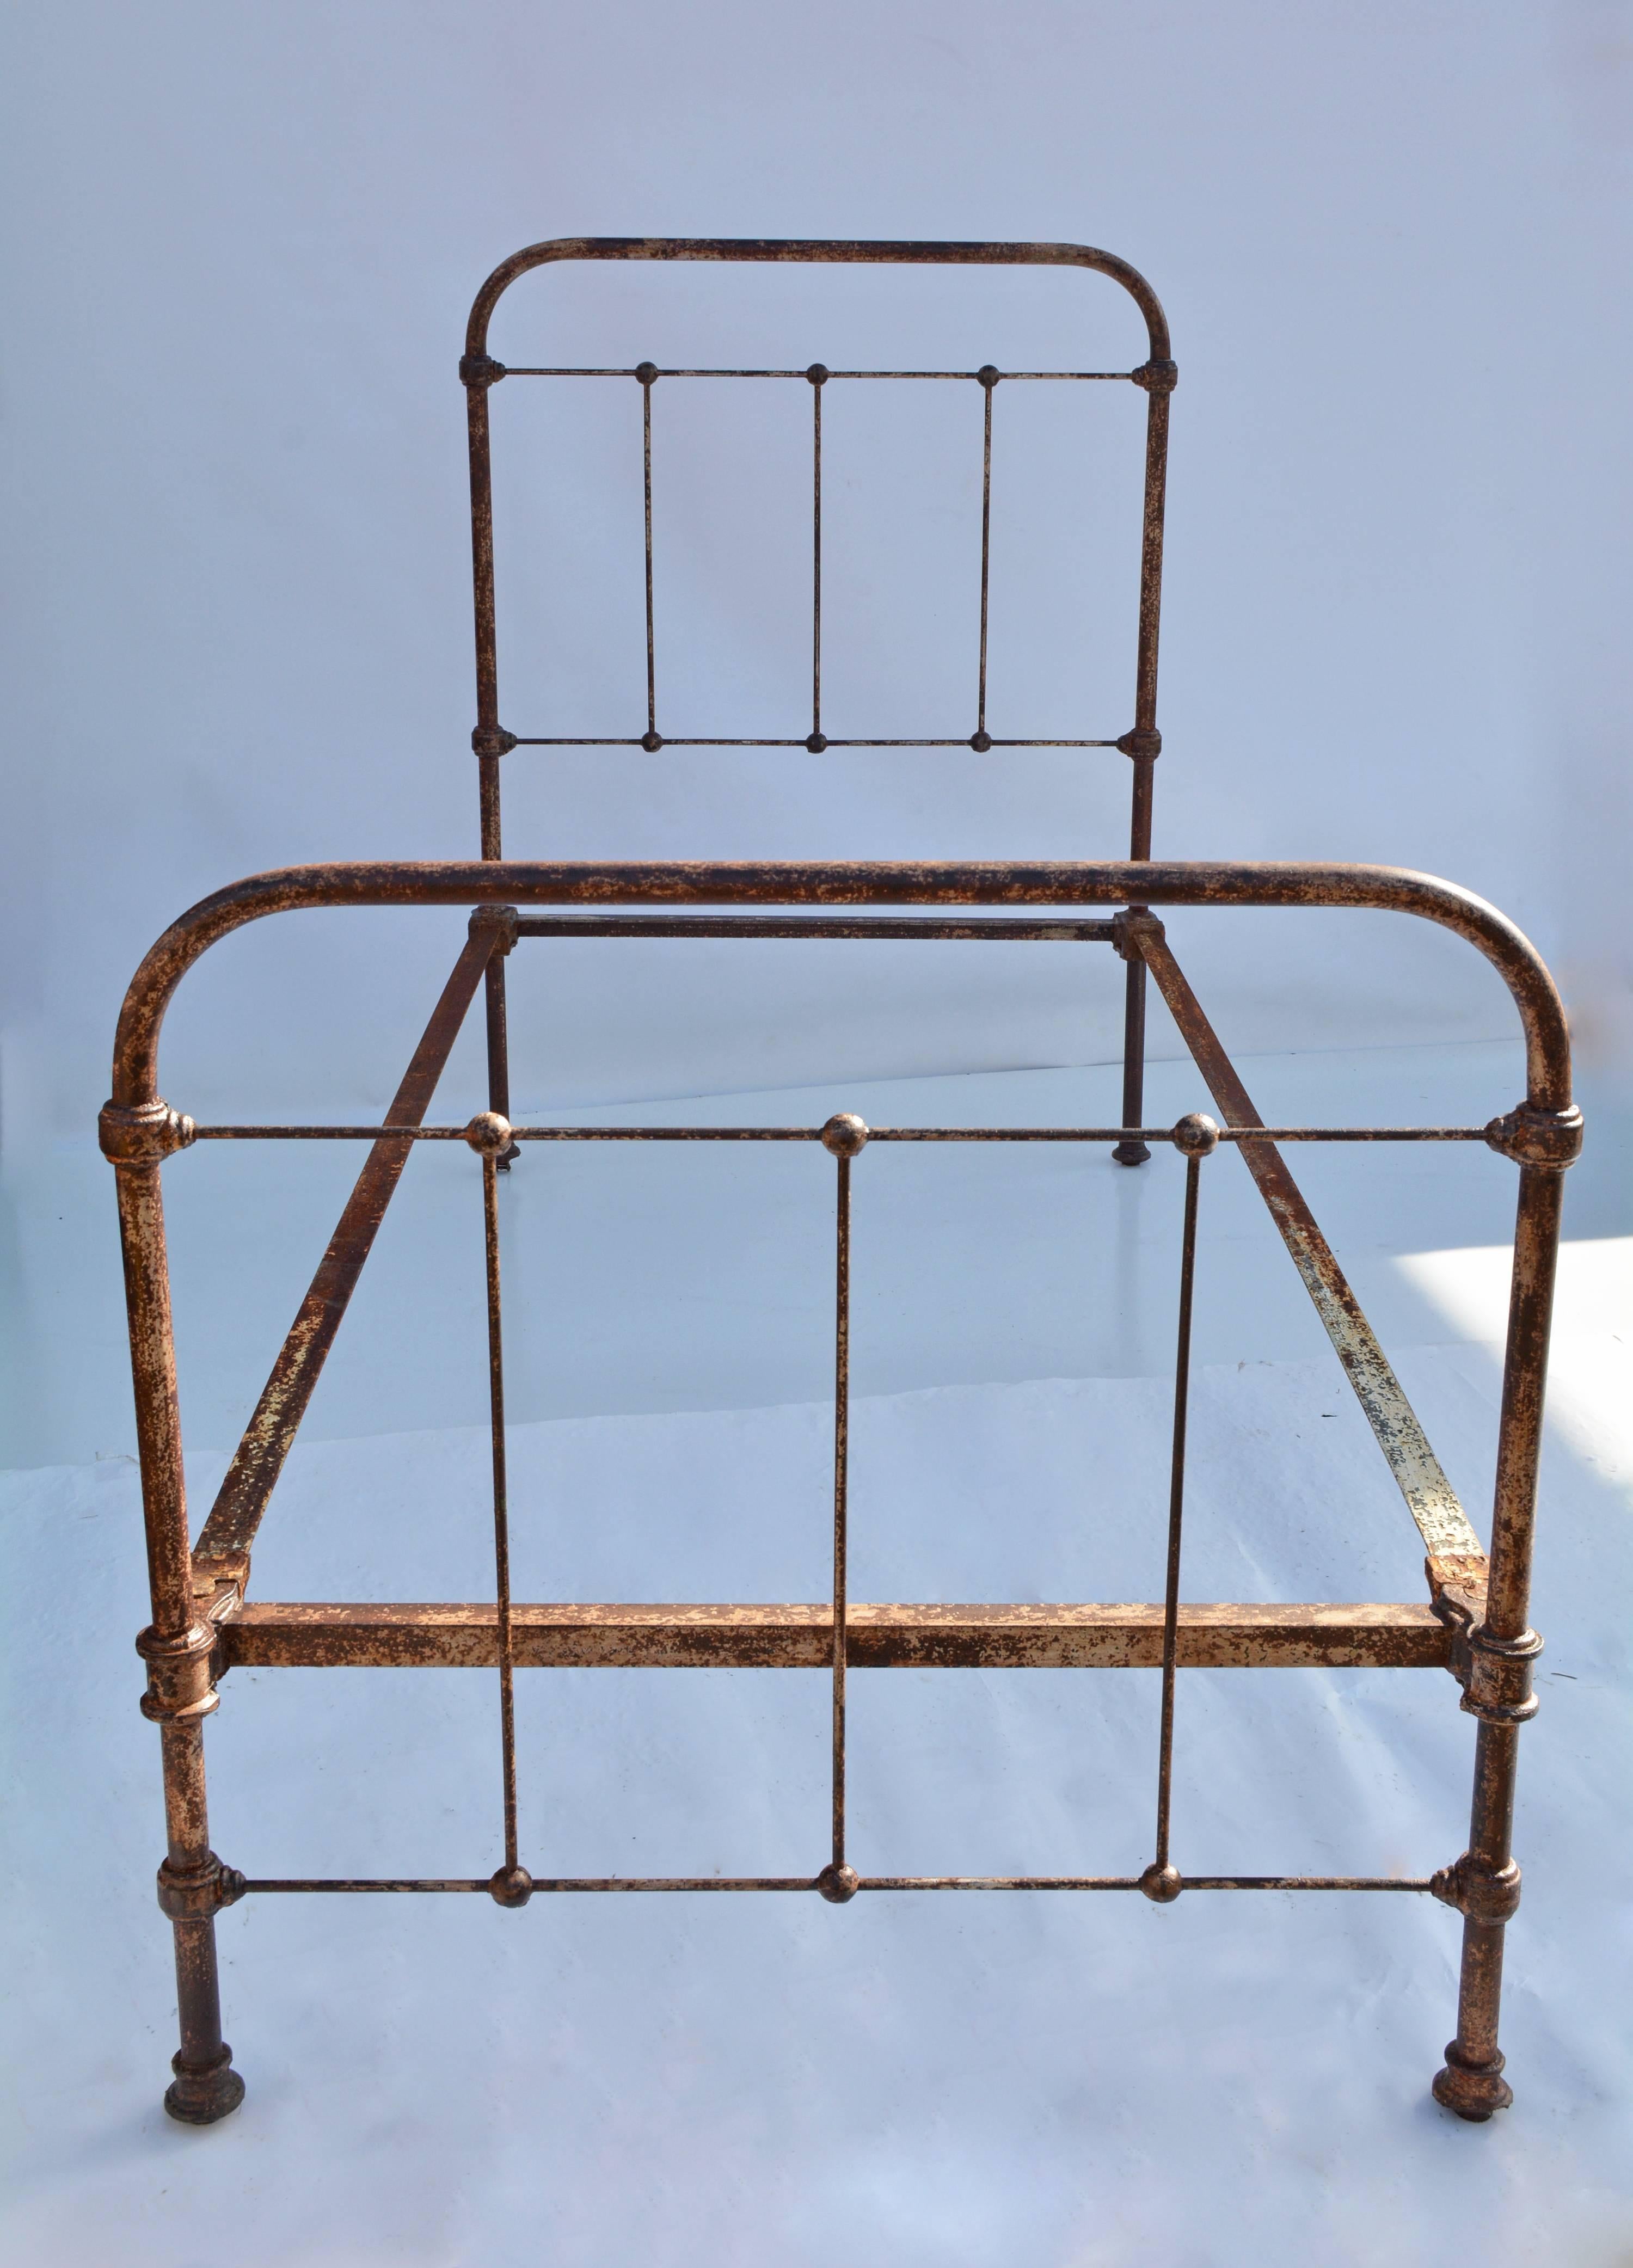 The antique country iron twin size bed has L-shaped side railings with protrusions that slide into slots attached to the head and foot boards. The railings will hold the mattresses. 

Footboard: 34.50